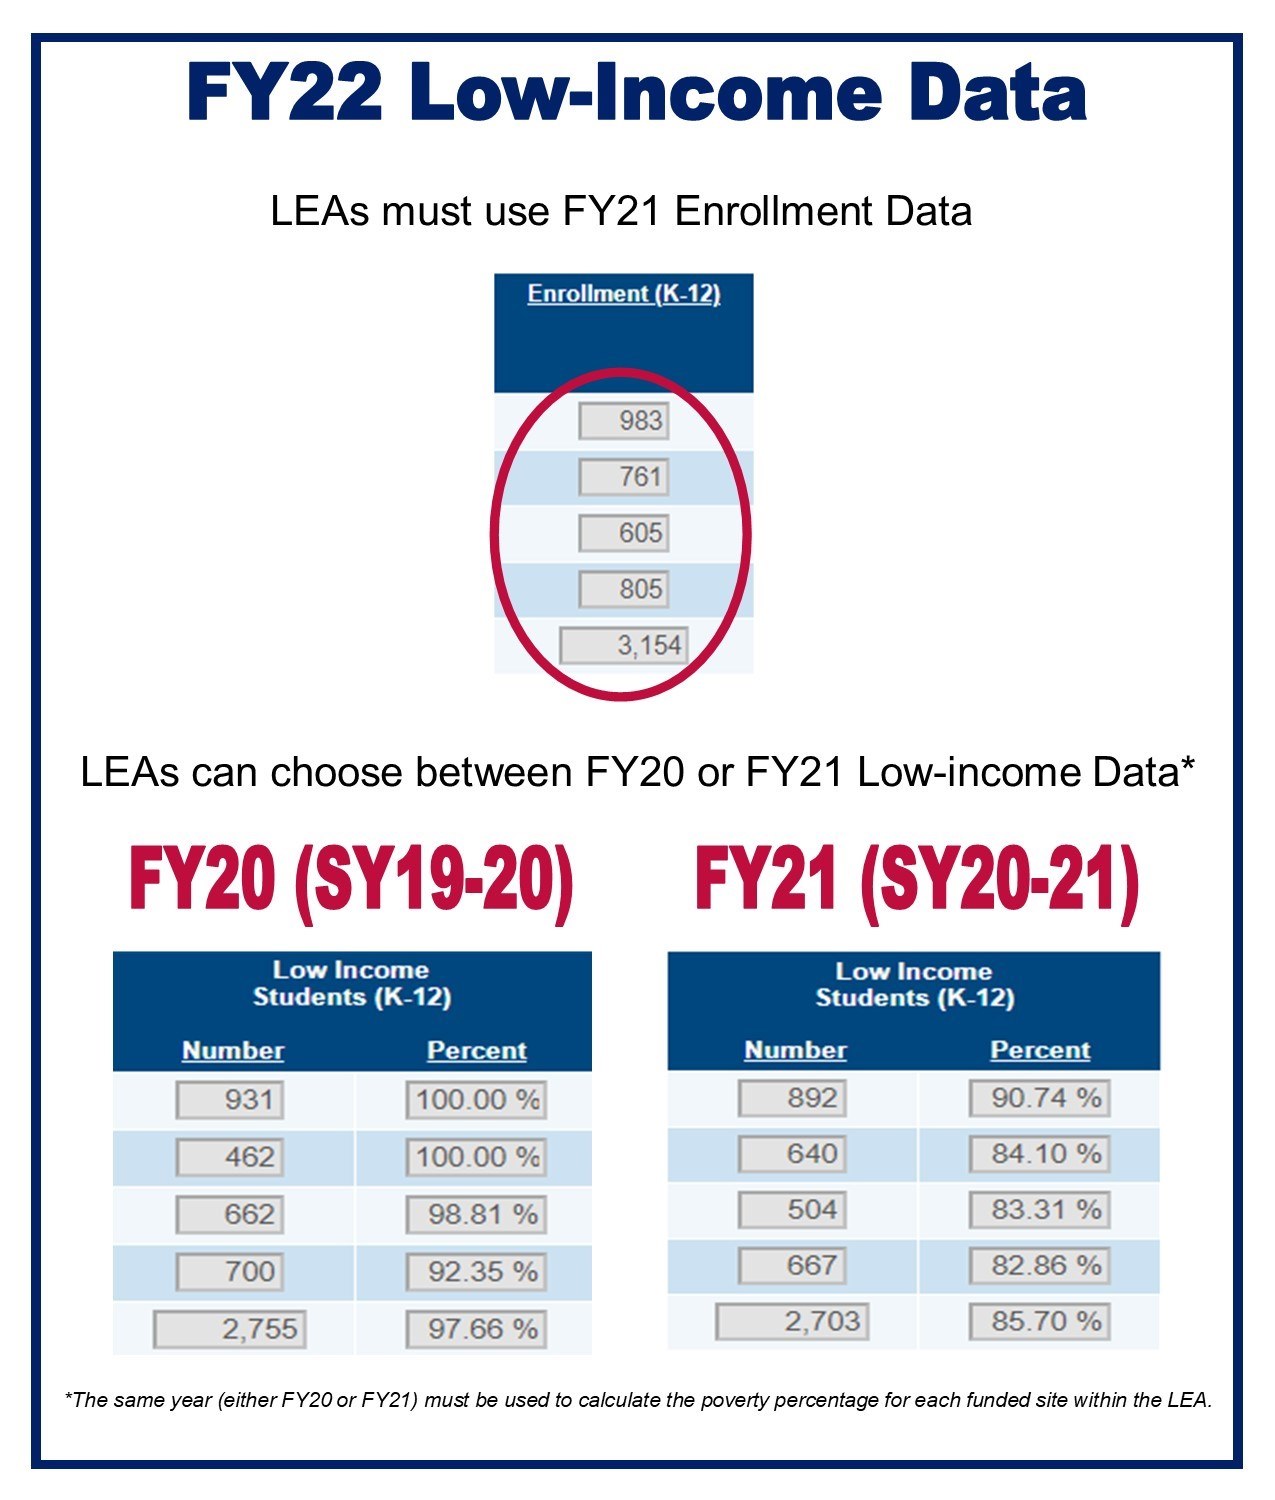 FY22 Low-Income Data